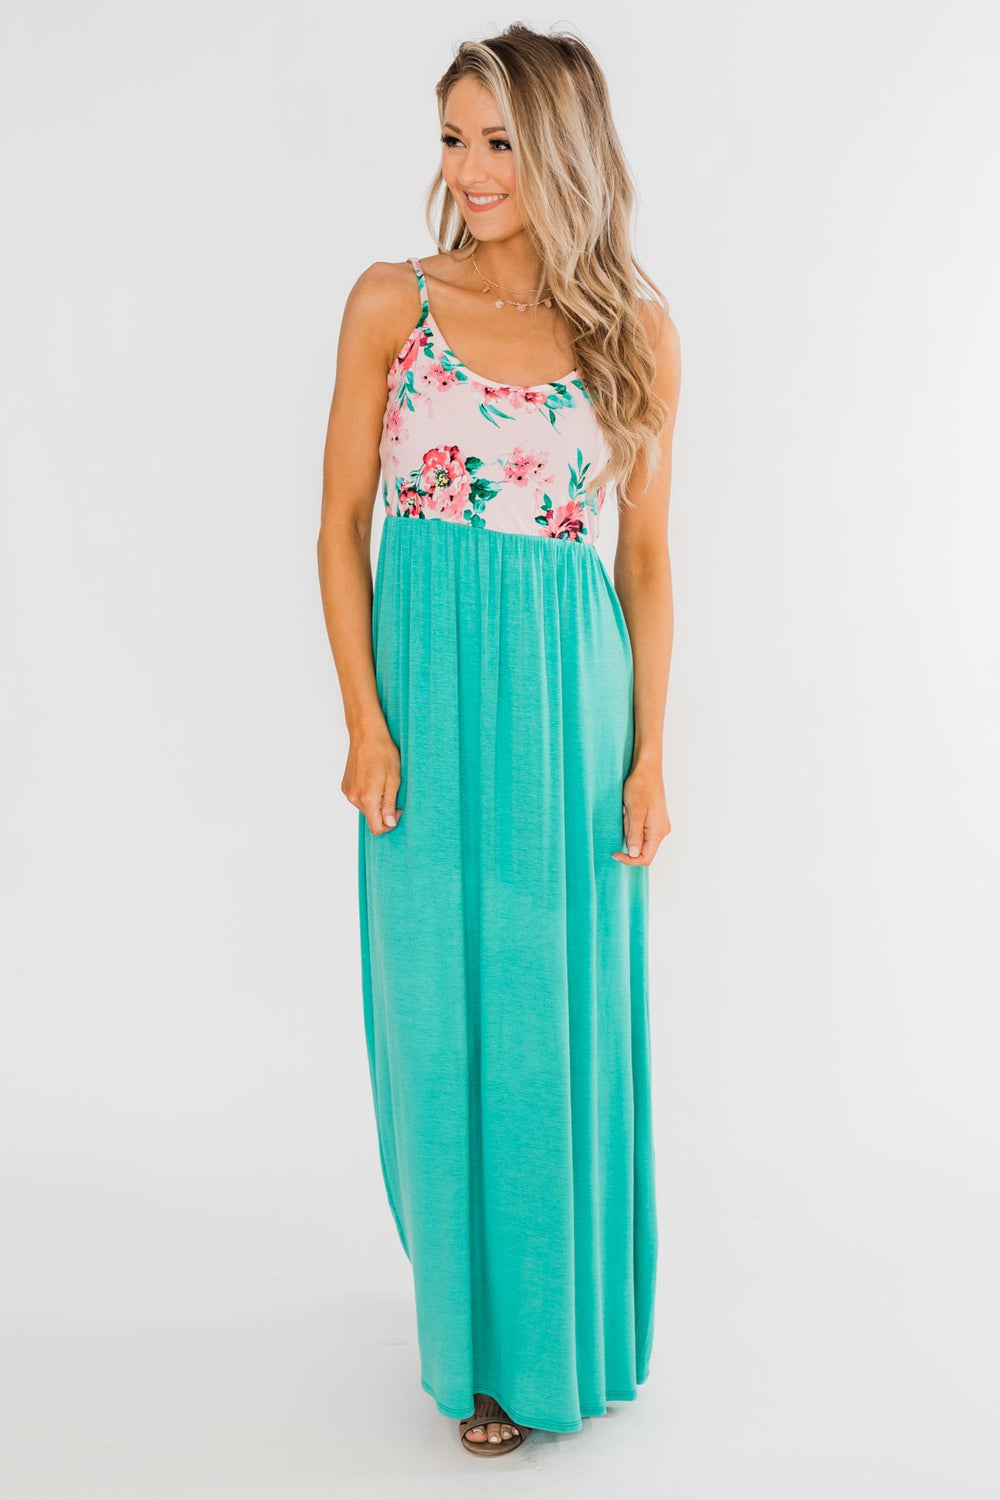 Endless Spring Floral Maxi Dress- Turquoise – The Pulse Boutique